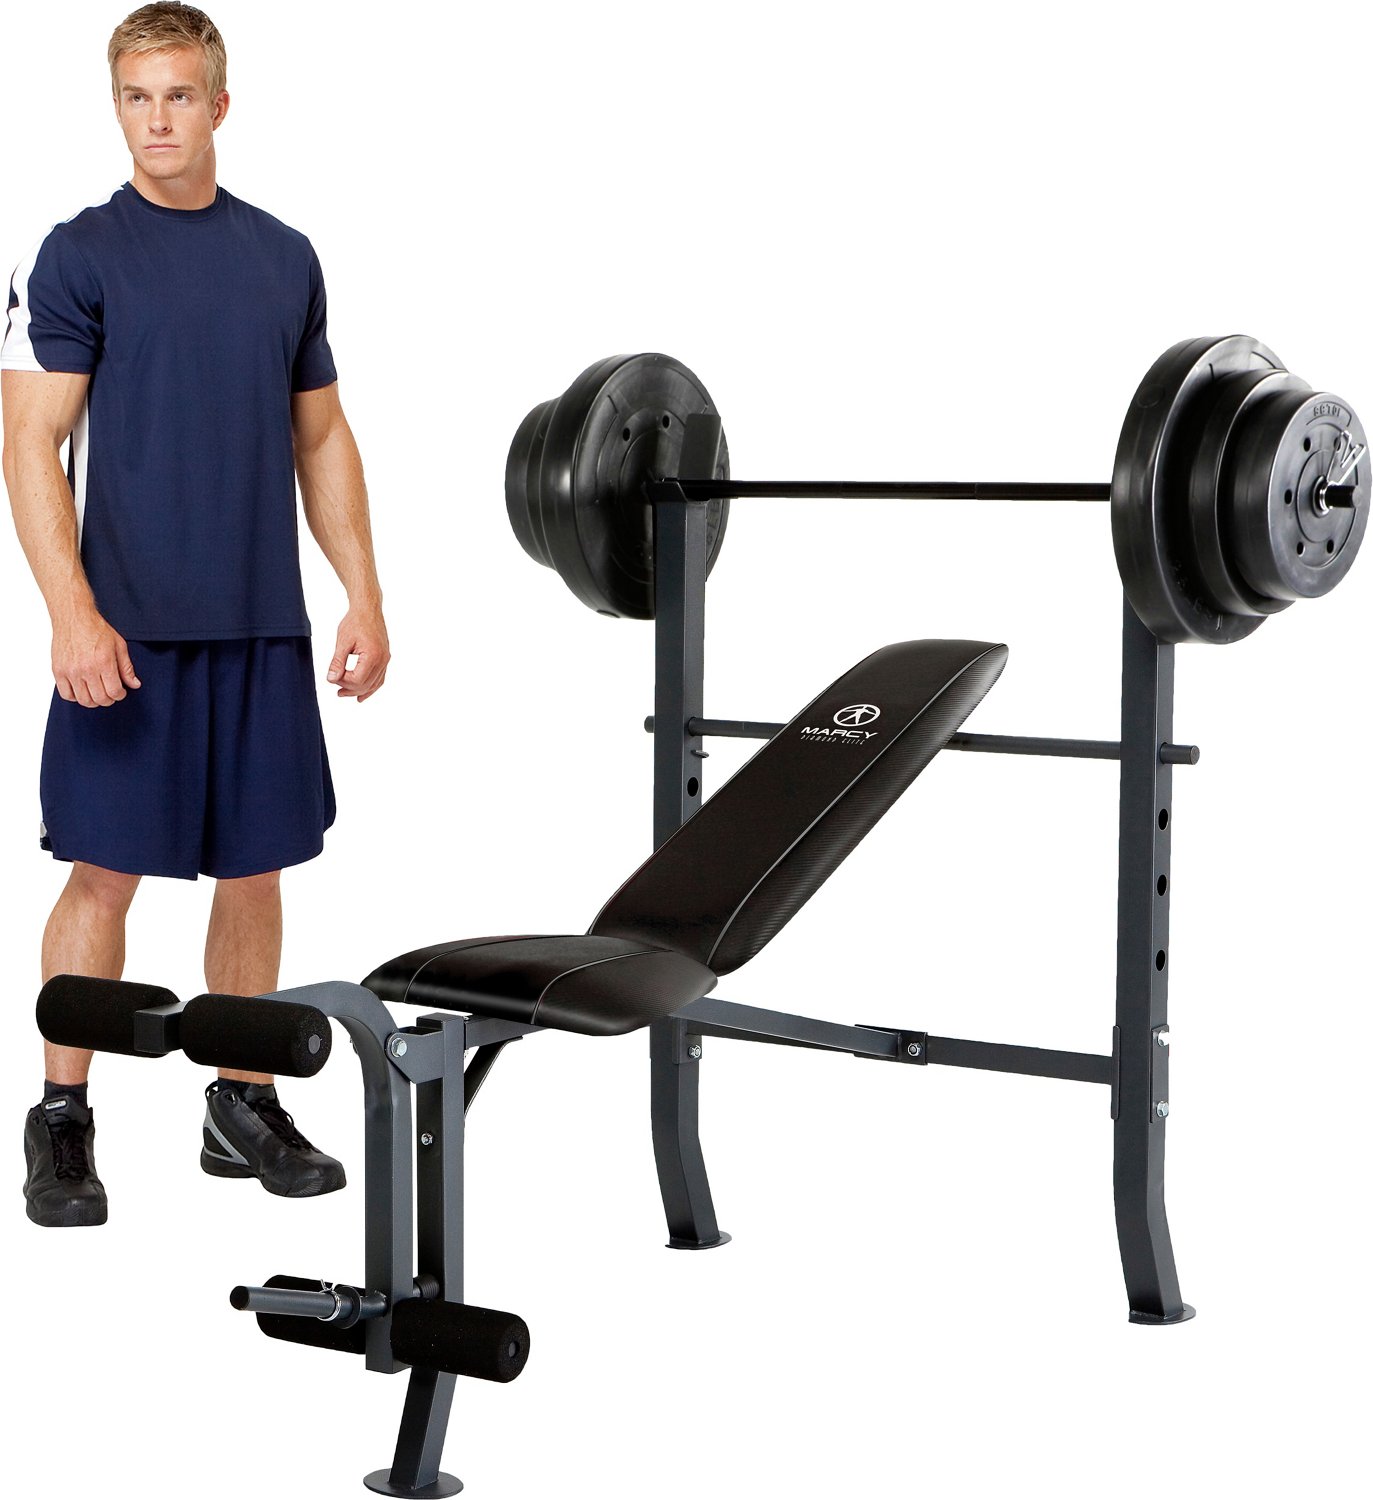 Details about   Adjustable Weight Bench Set Home Gym Press Lifting Barbell Exercise Workout 440 